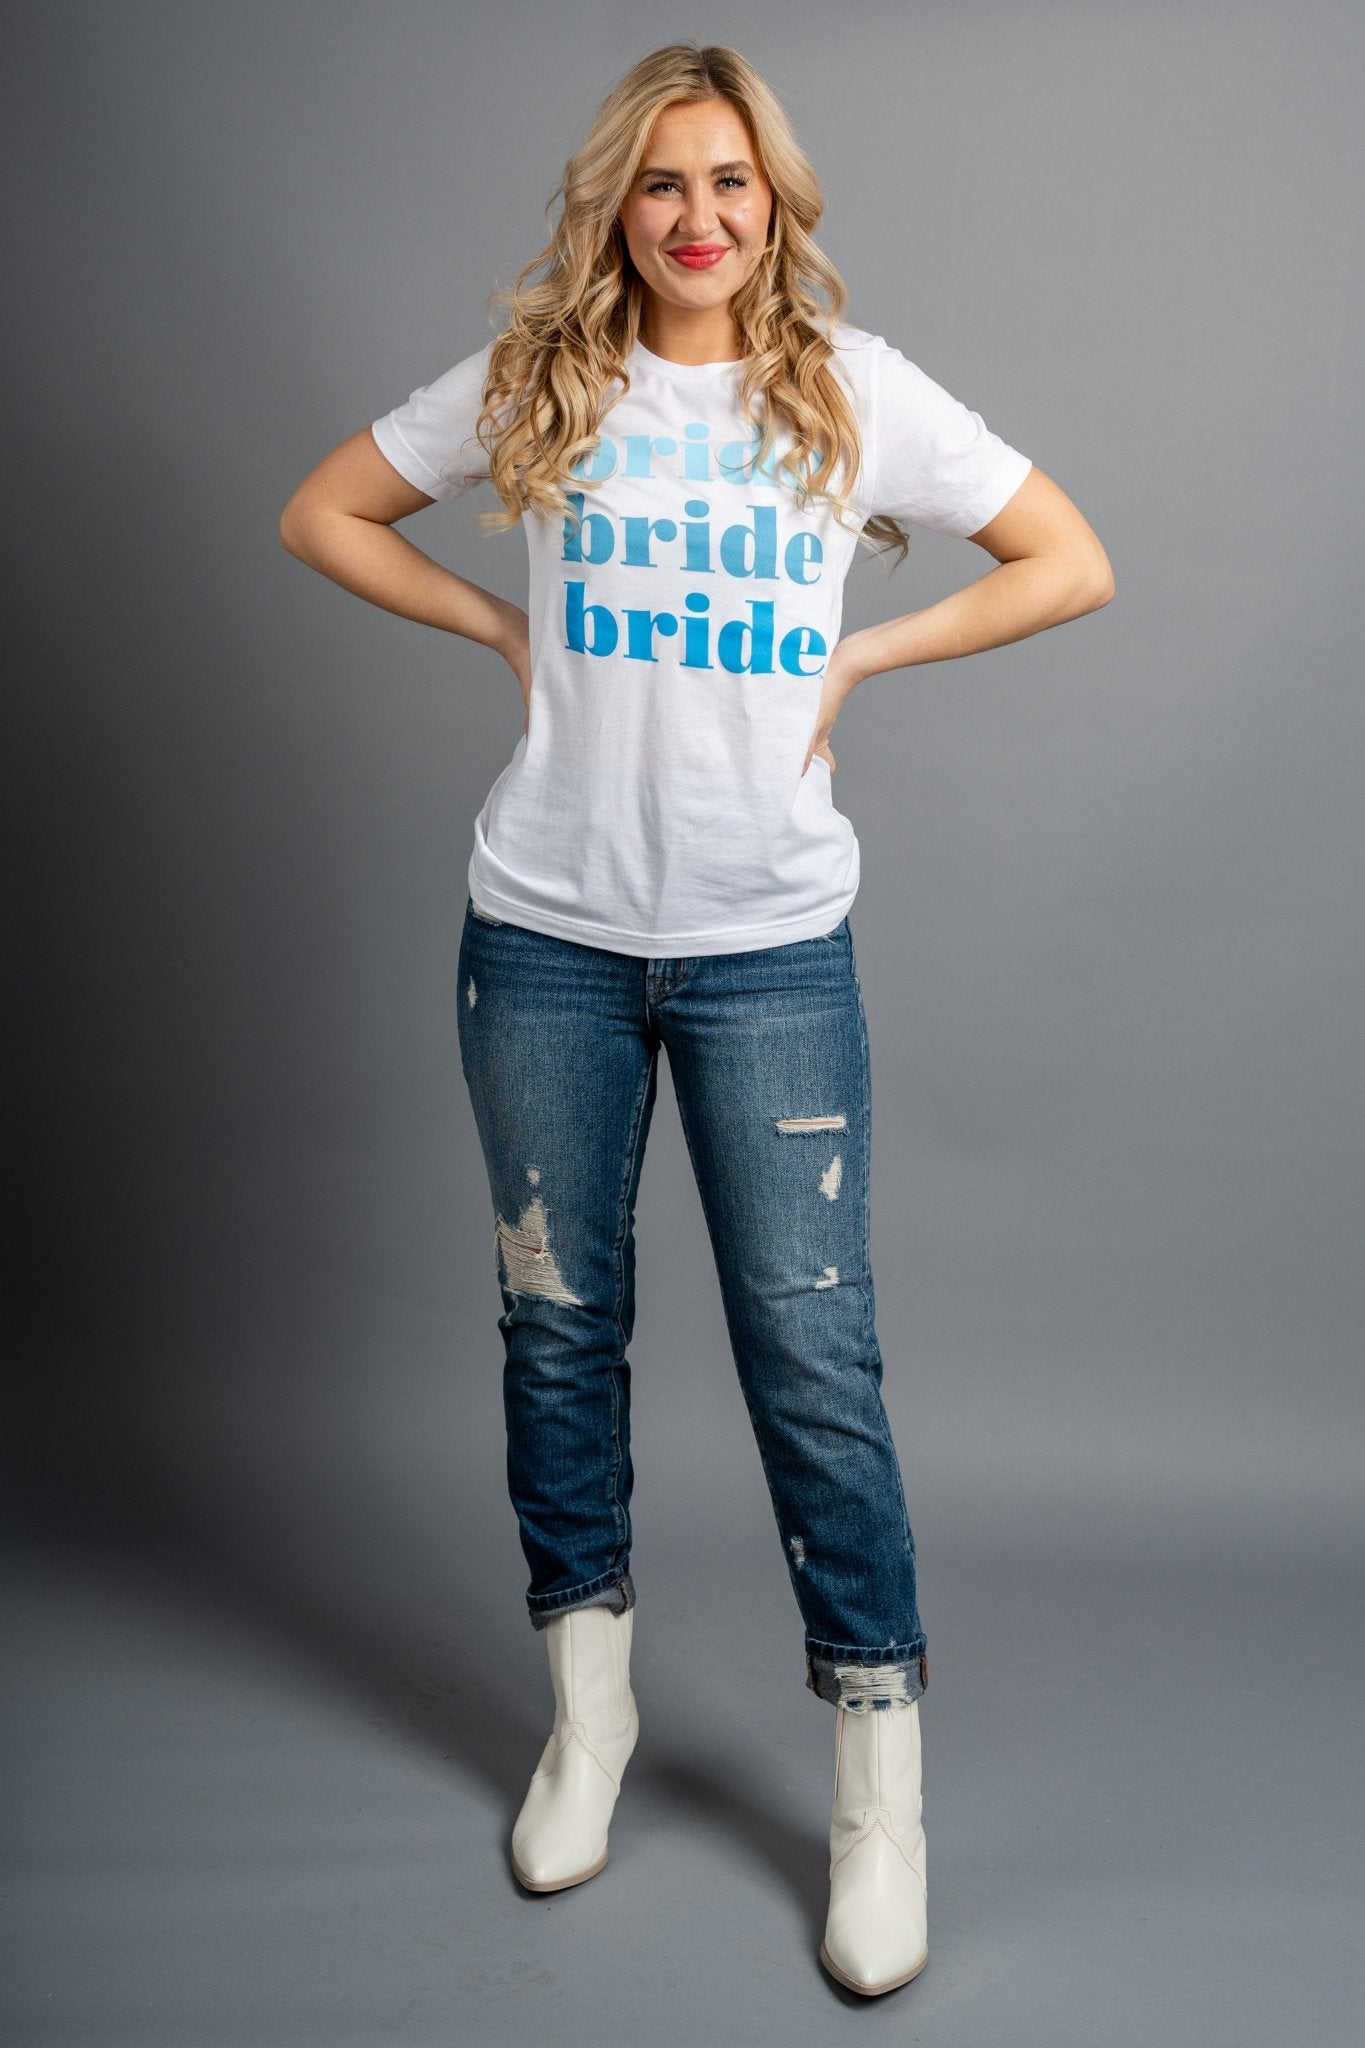 Bride repeater short sleeve t-shirt white - Trendy t-shirt - Cute Graphic Tee Fashion at Lush Fashion Lounge Boutique in Oklahoma